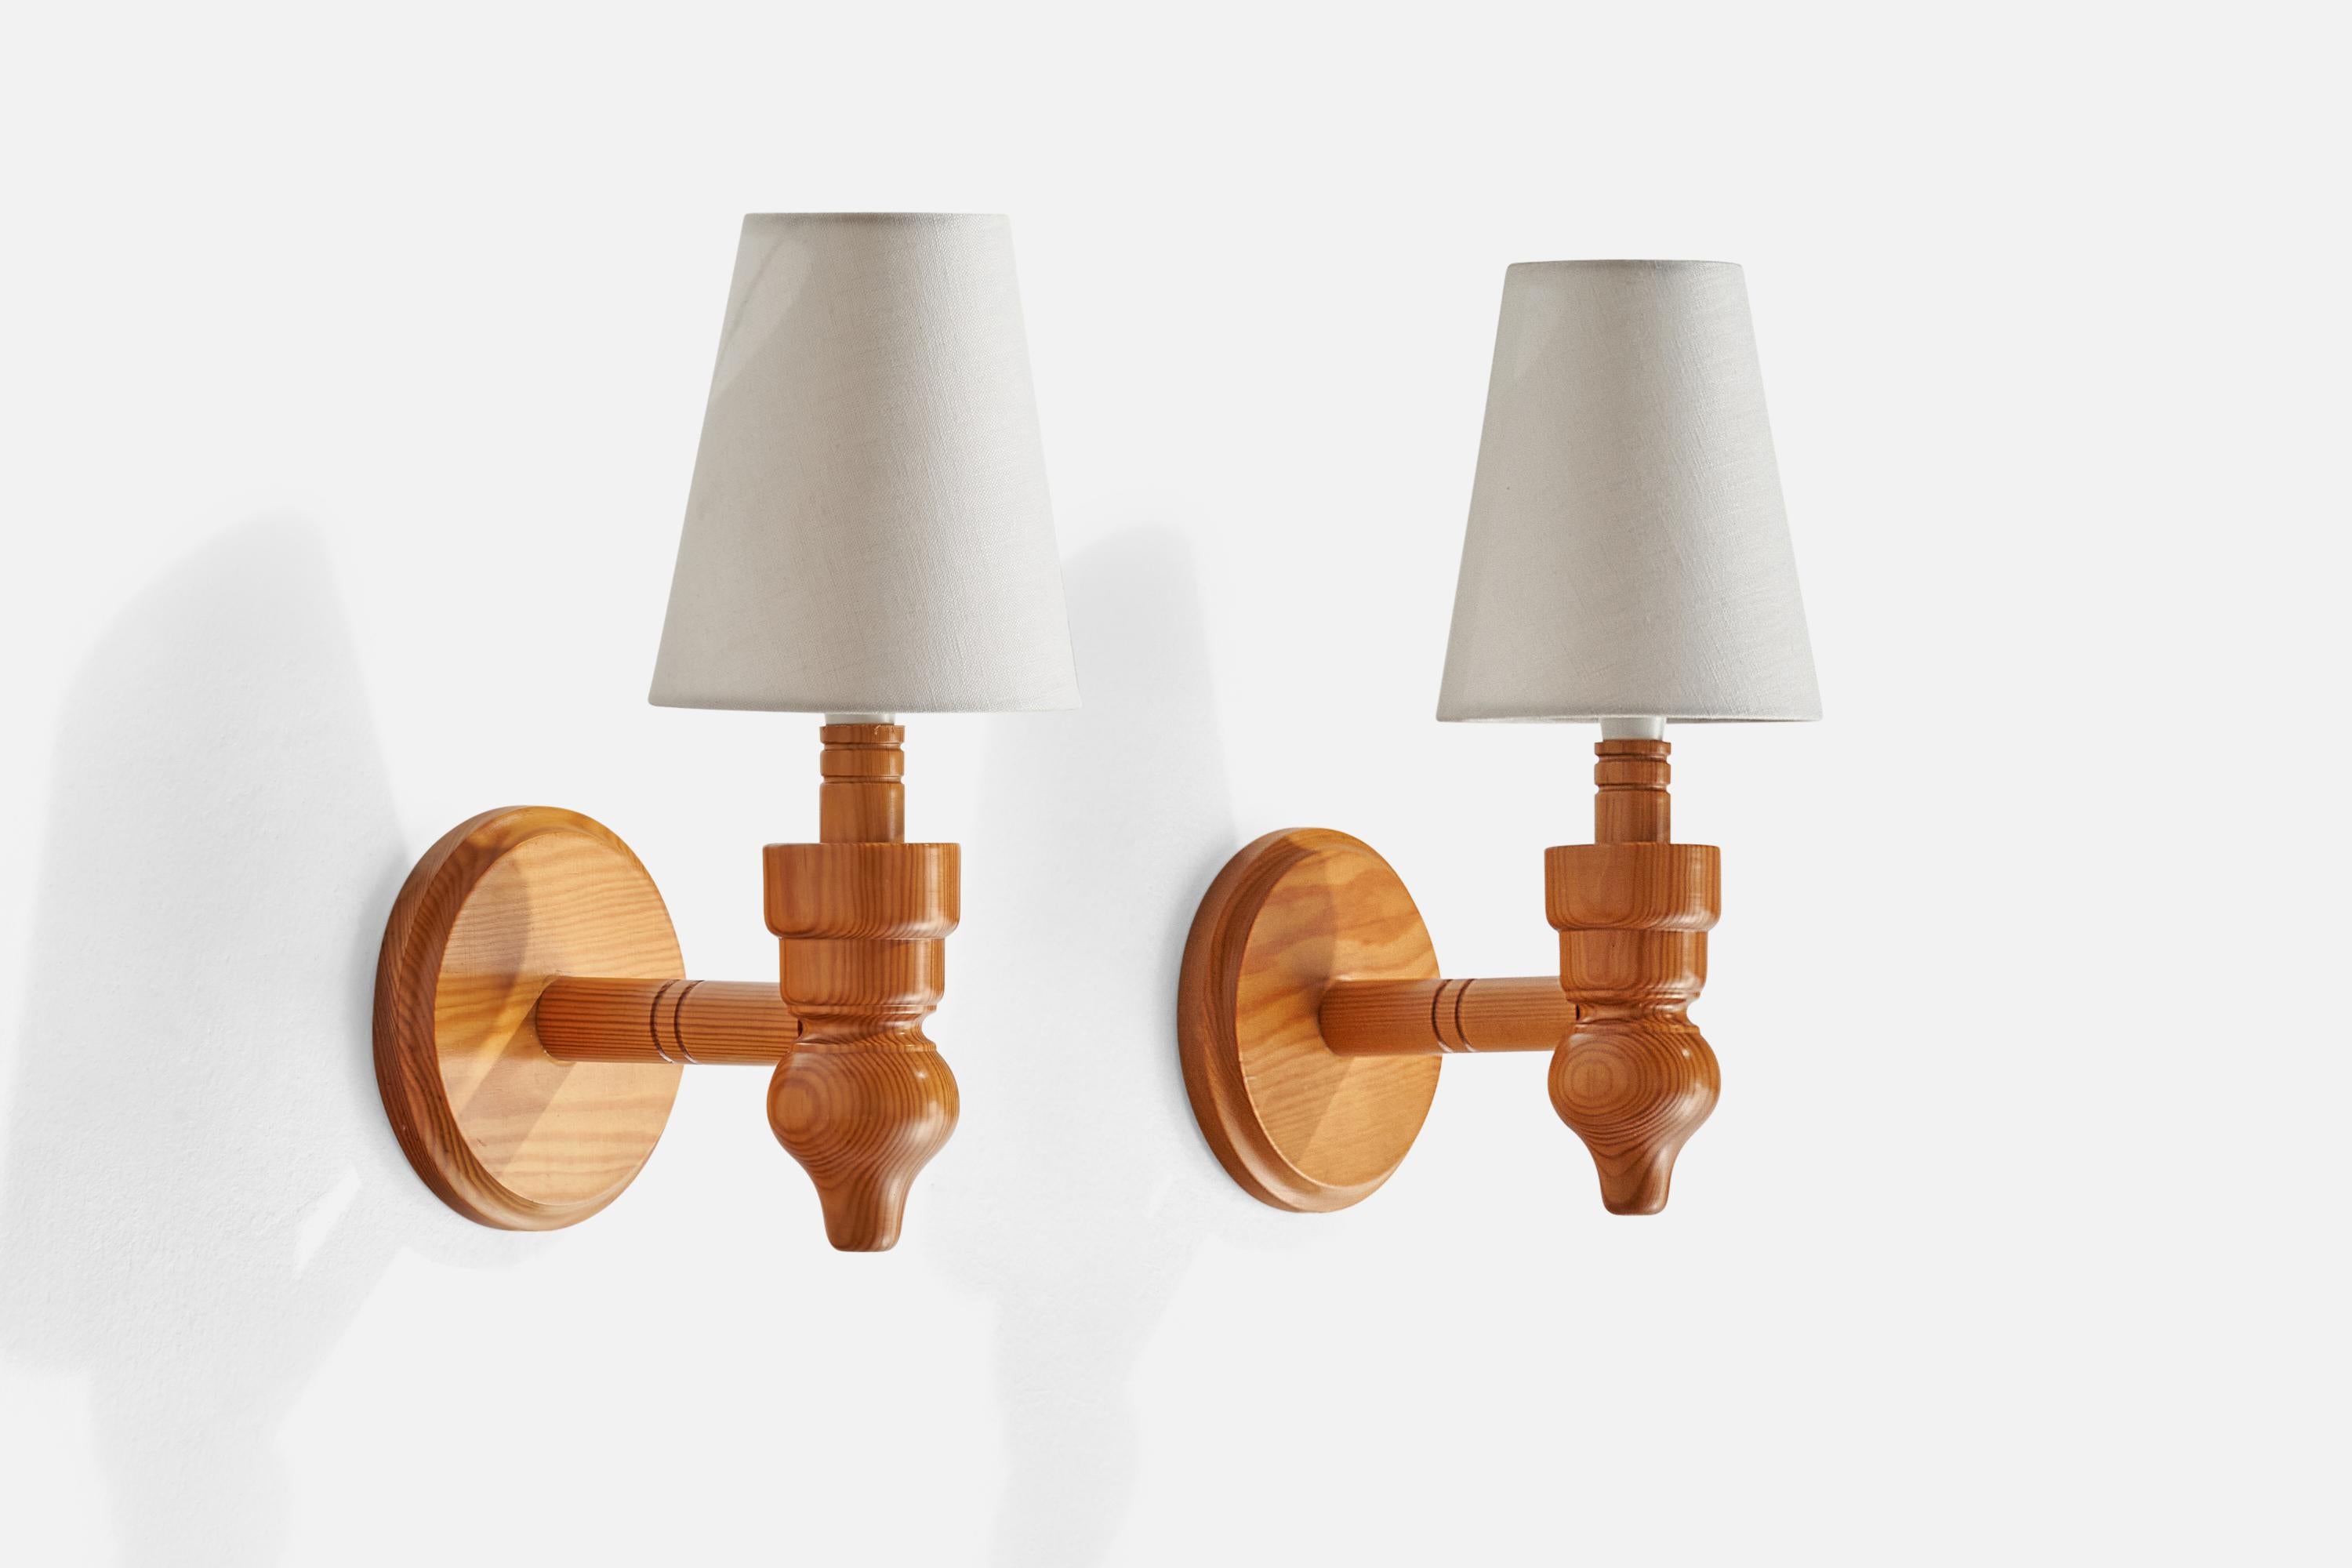 A pair of pine and white fabric wall lights designed and produced in Sweden, 1970s.

Overall Dimensions (inches): 6” H x 5” W x 6.75” D
Back Plate Dimensions (inches): 5.25” H x 5.25” W x .75” D
Bulb Specifications: E-14 Bulb
Number of Sockets: